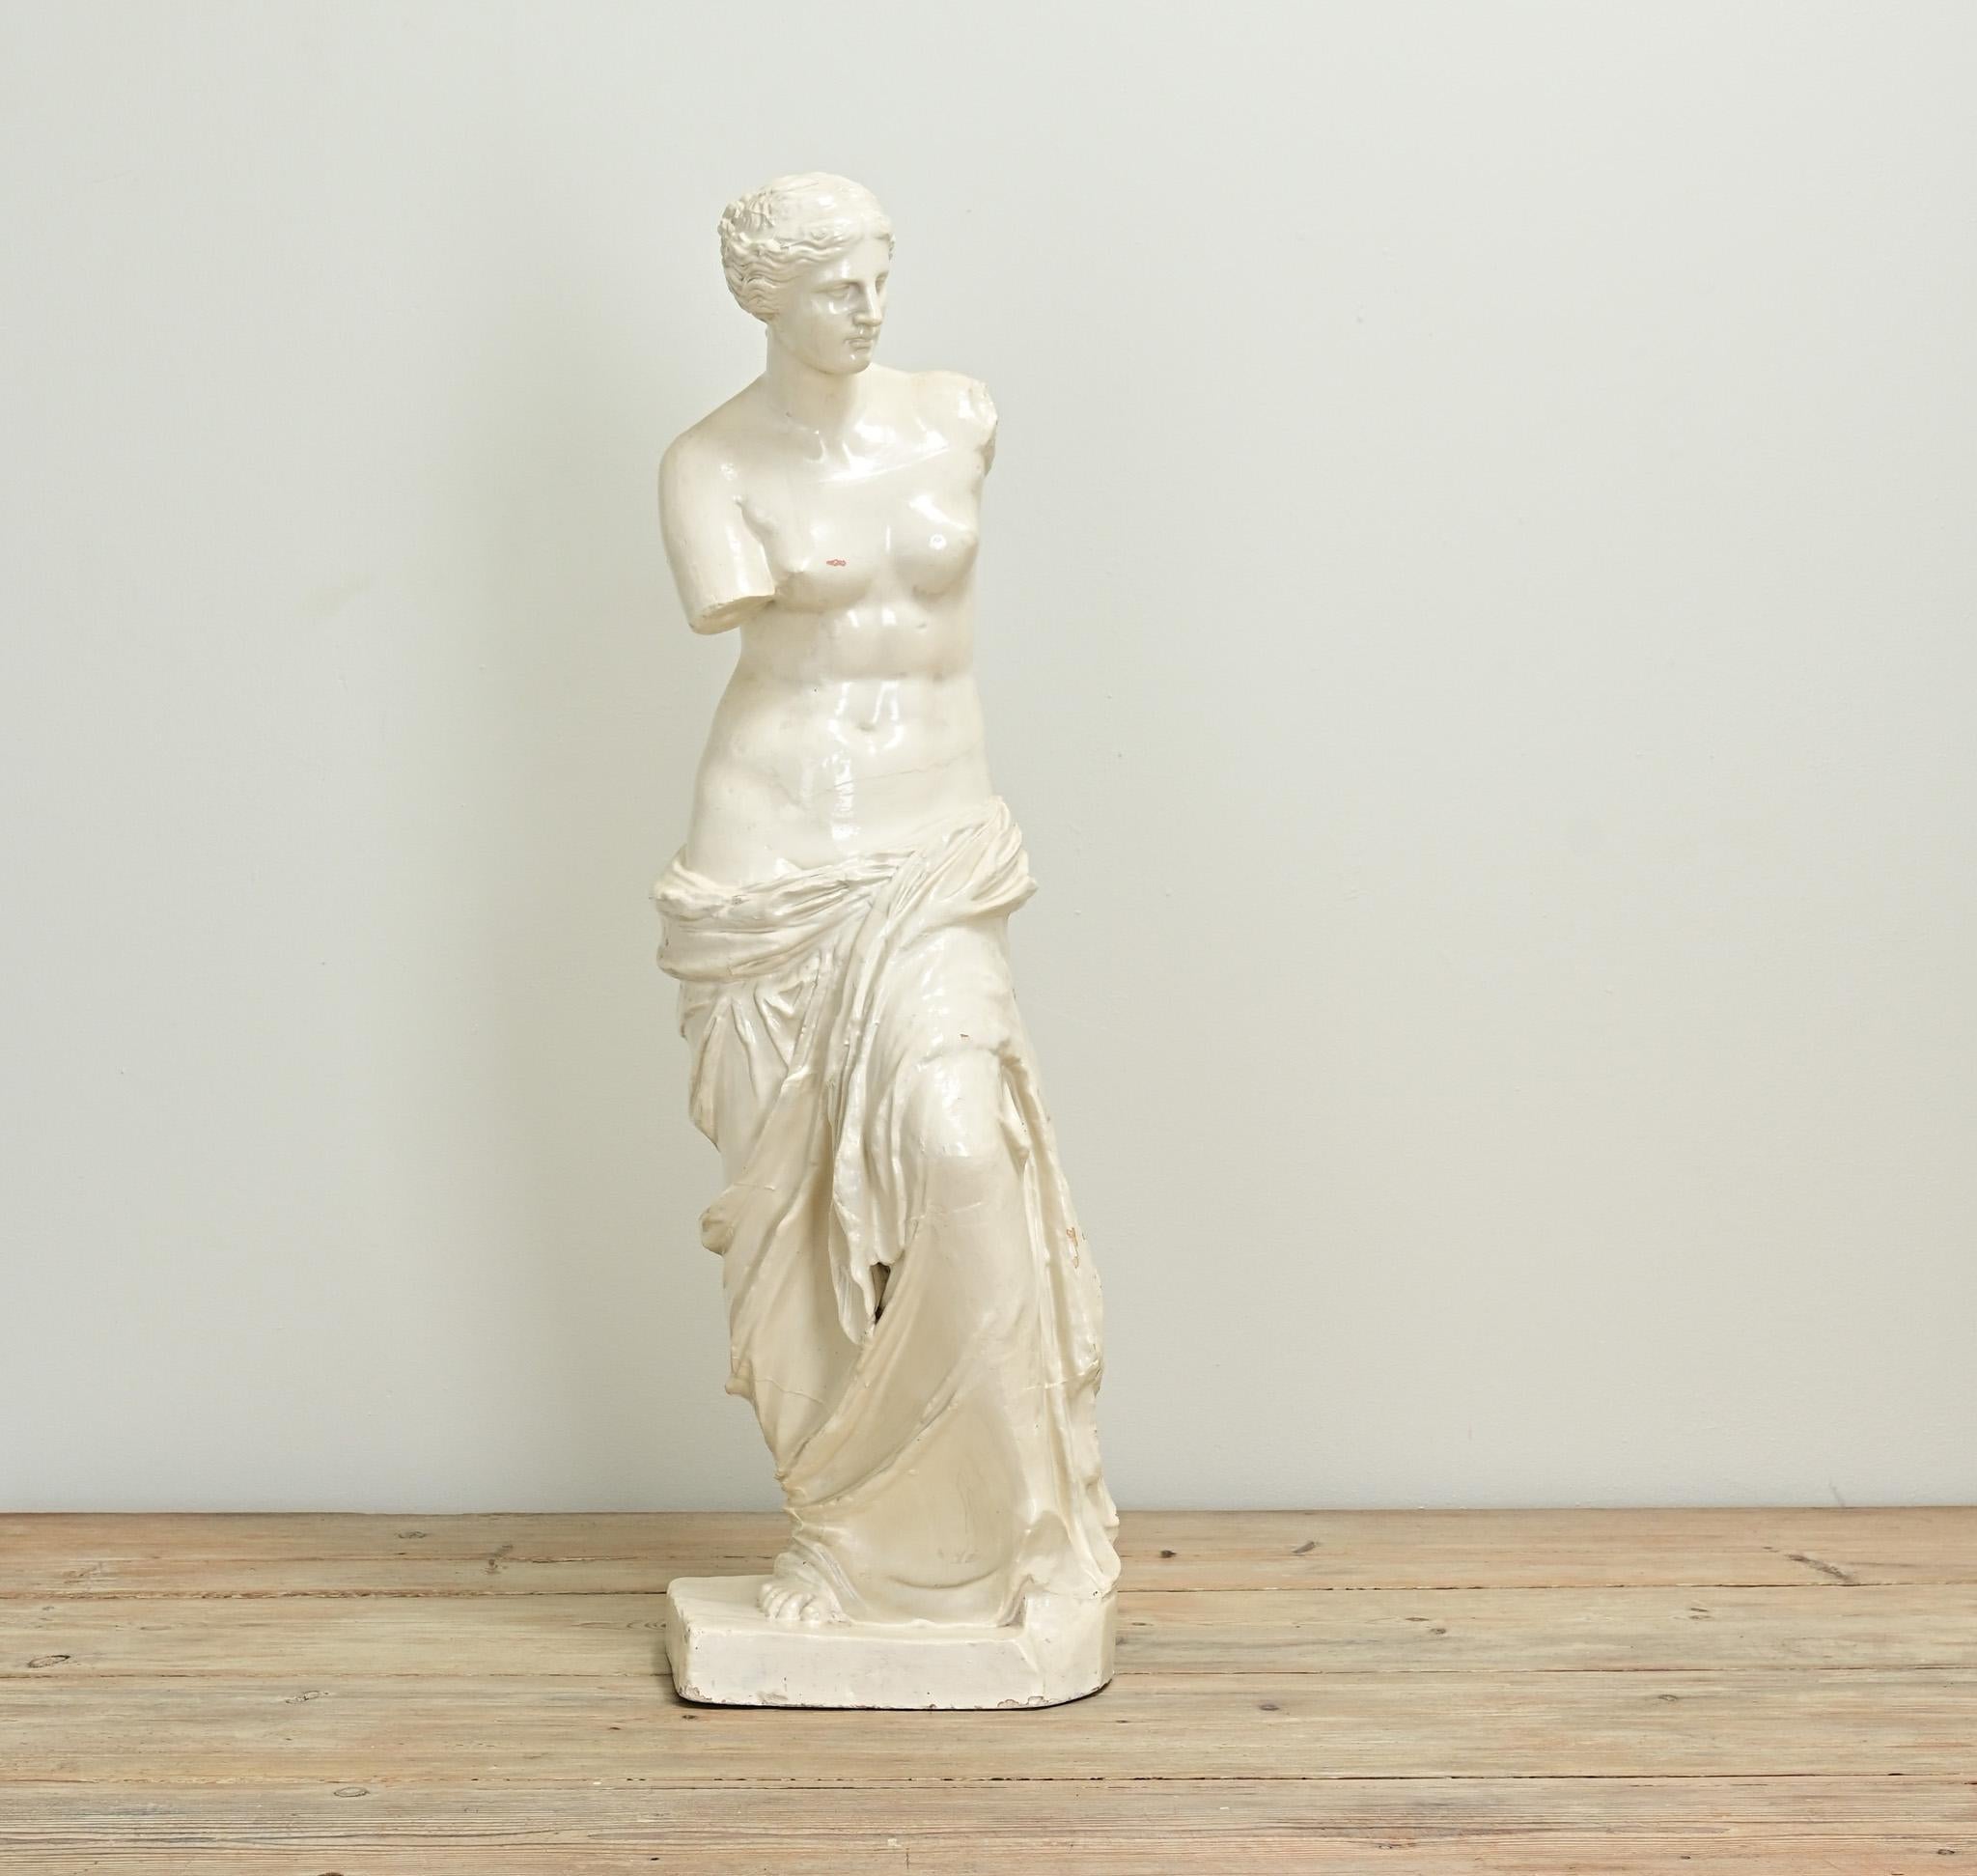 This petite replica of the iconic statue, Venus de Milo, is just under three feet tall. The original statue was found on the island of Milos, and is believed to be the Greek goddess, Aphrodite, referred to in Roman mythology as Venus. This